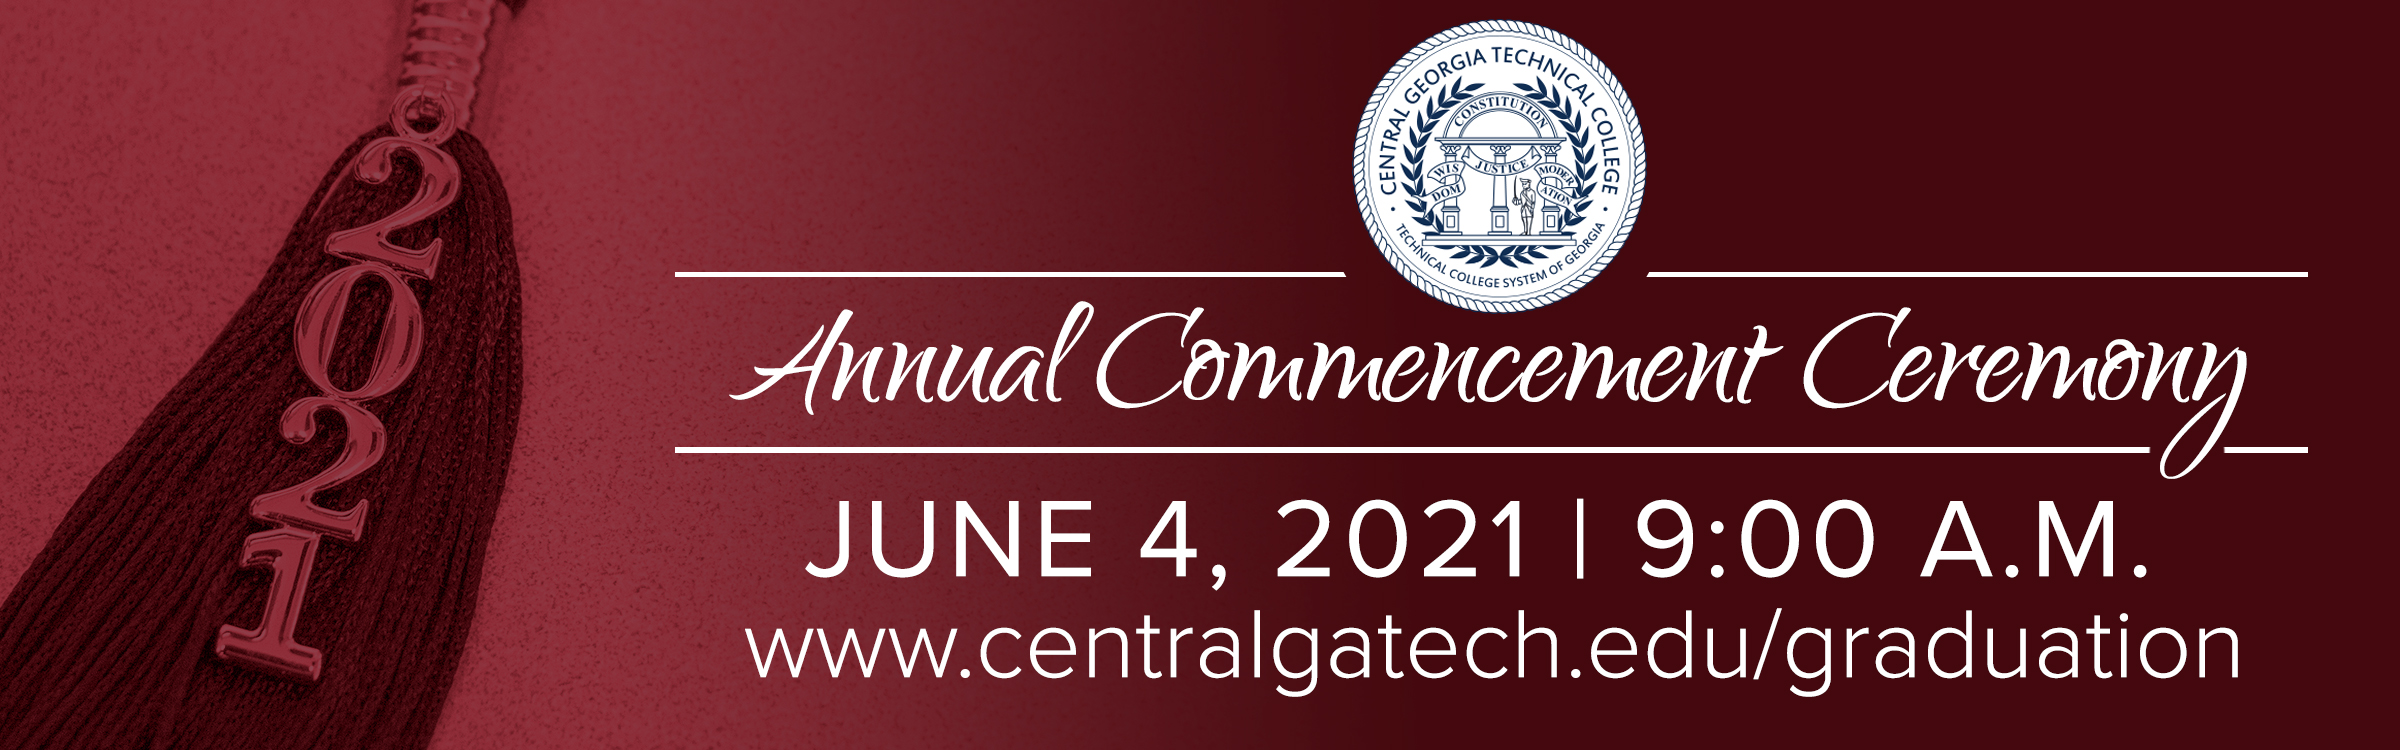 CGTC Announces In-Person Commencement Ceremony for June 4